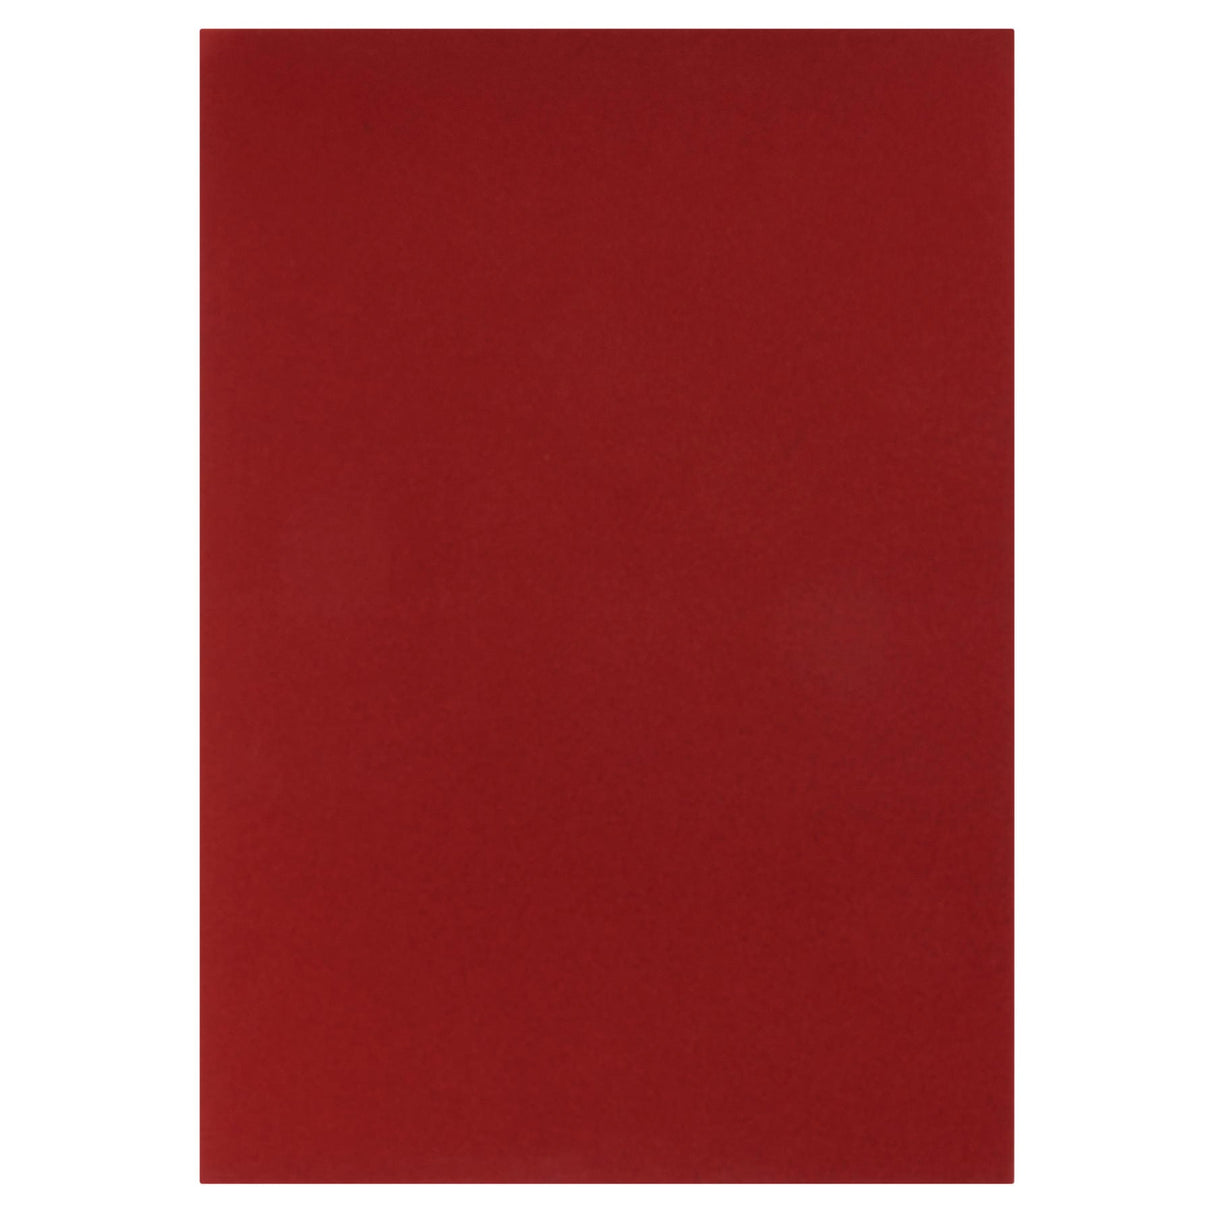 Premier Activity A4 Glitter Card- 250 gsm - Red - 10 Sheets | Stationery Shop UK